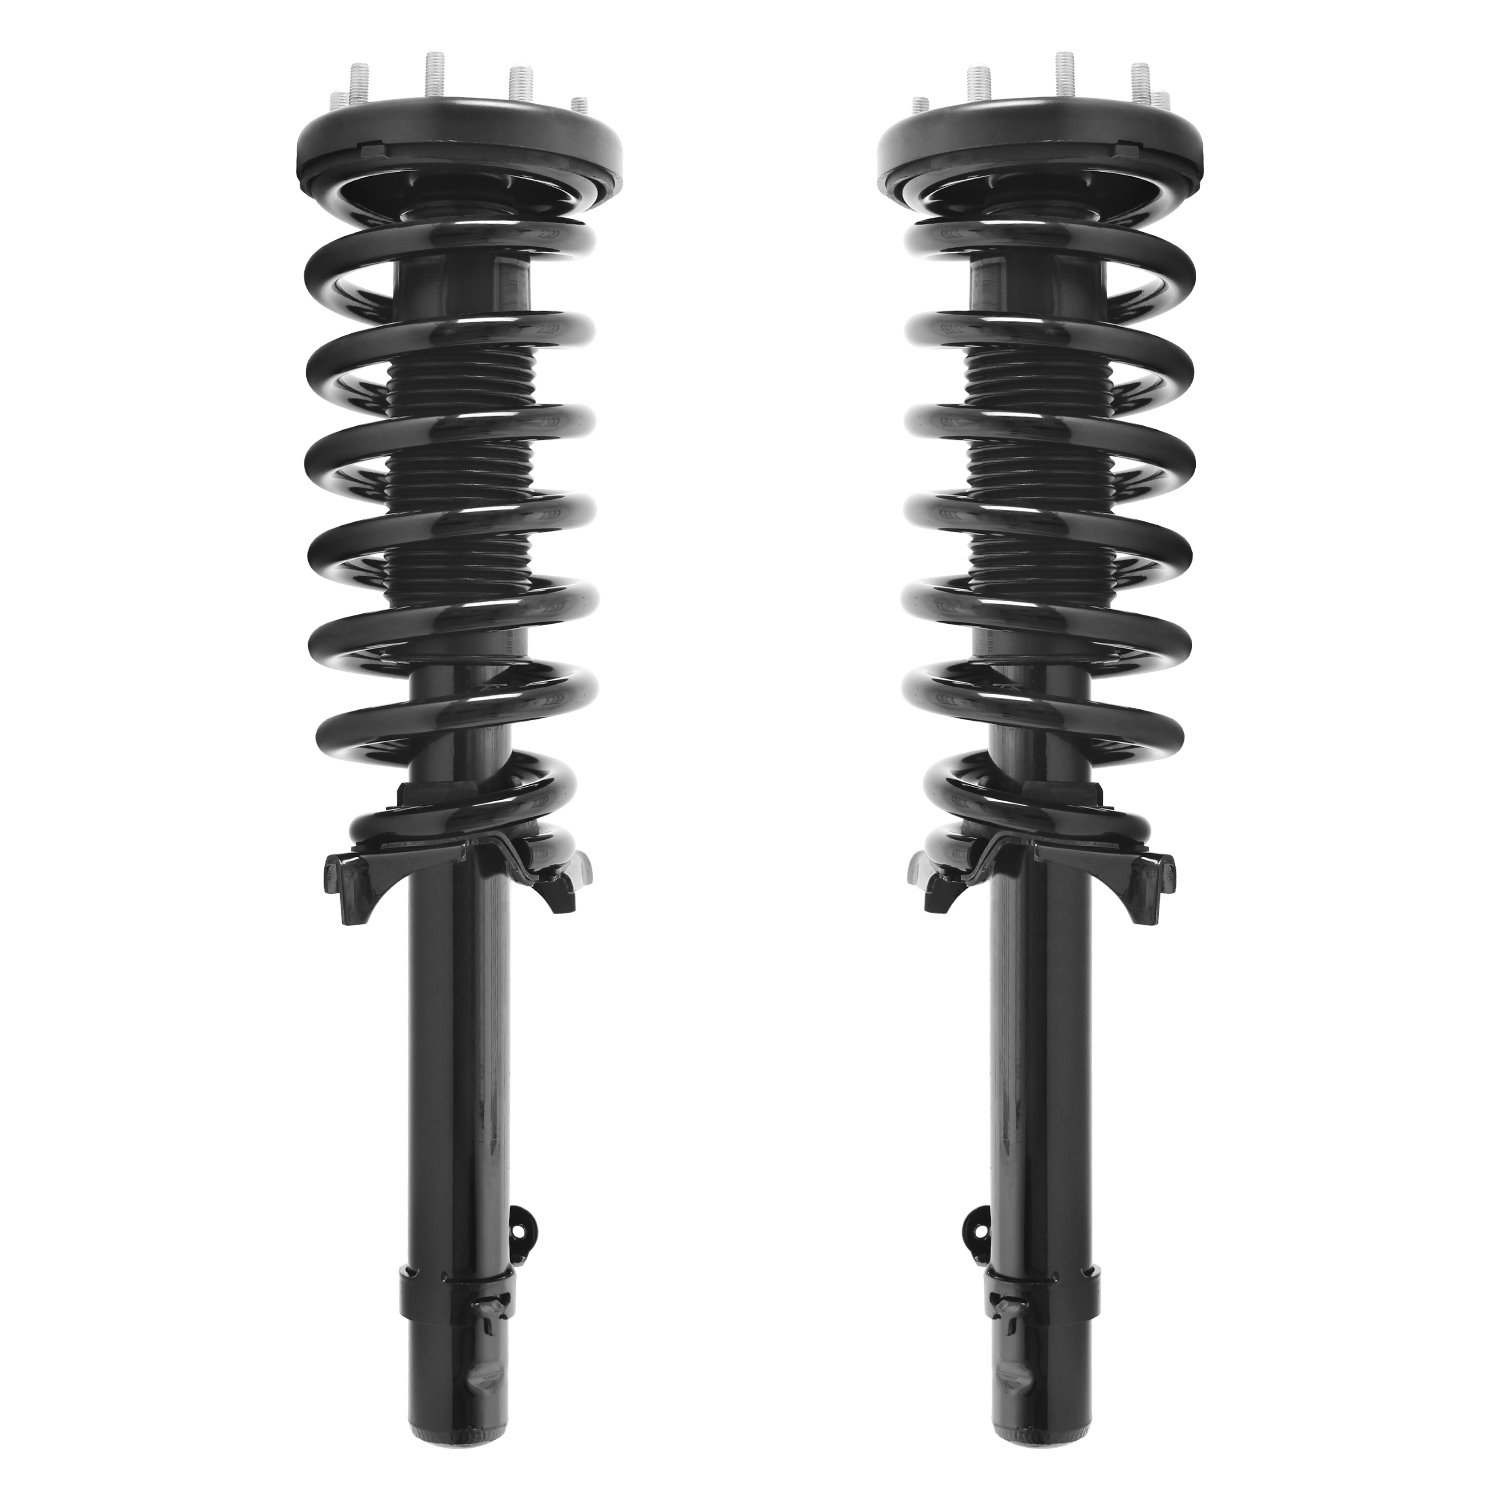 2-11237-11238-001 Suspension Strut & Coil Spring Assembly Set Fits Select Honda Accord